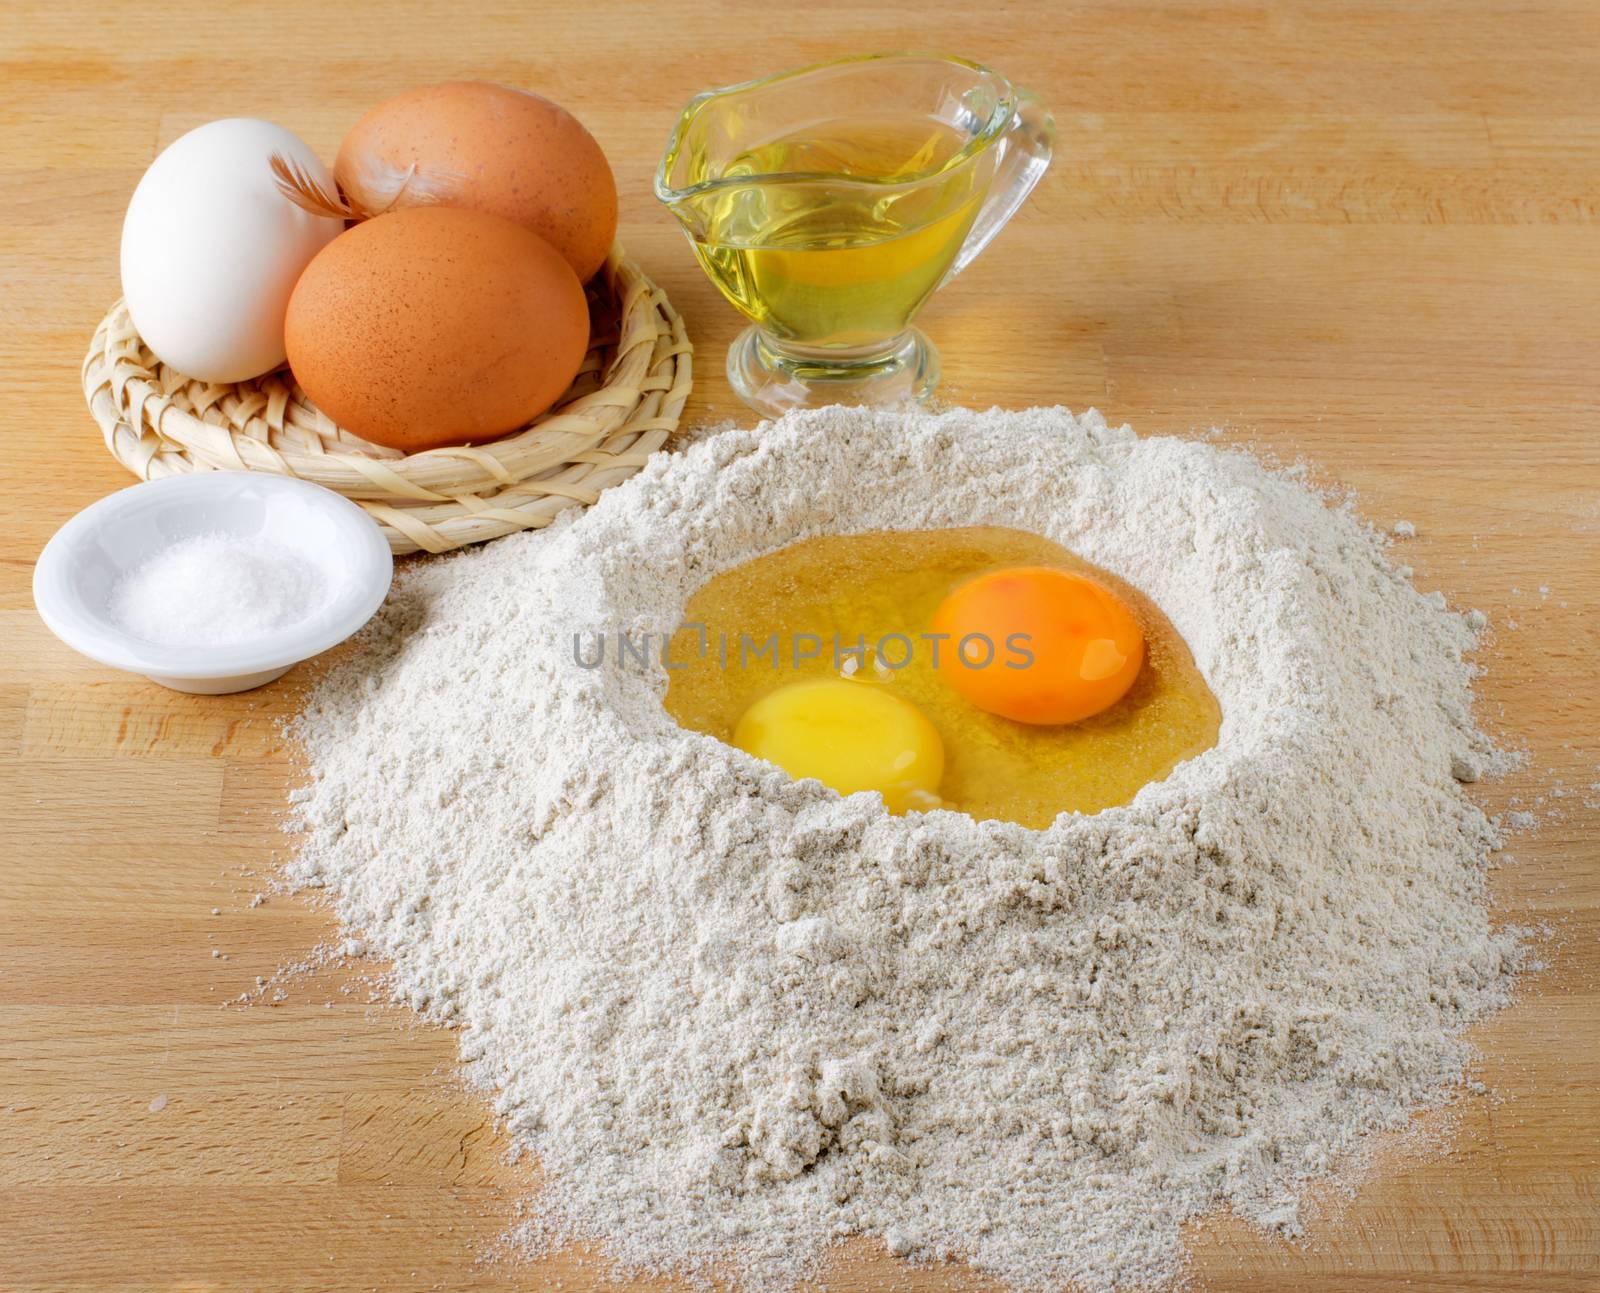 Preparing Dough with Raw Ingredients. Flour, Eggs, Salt and Olive Oil closeup on Wooden Cutting Board